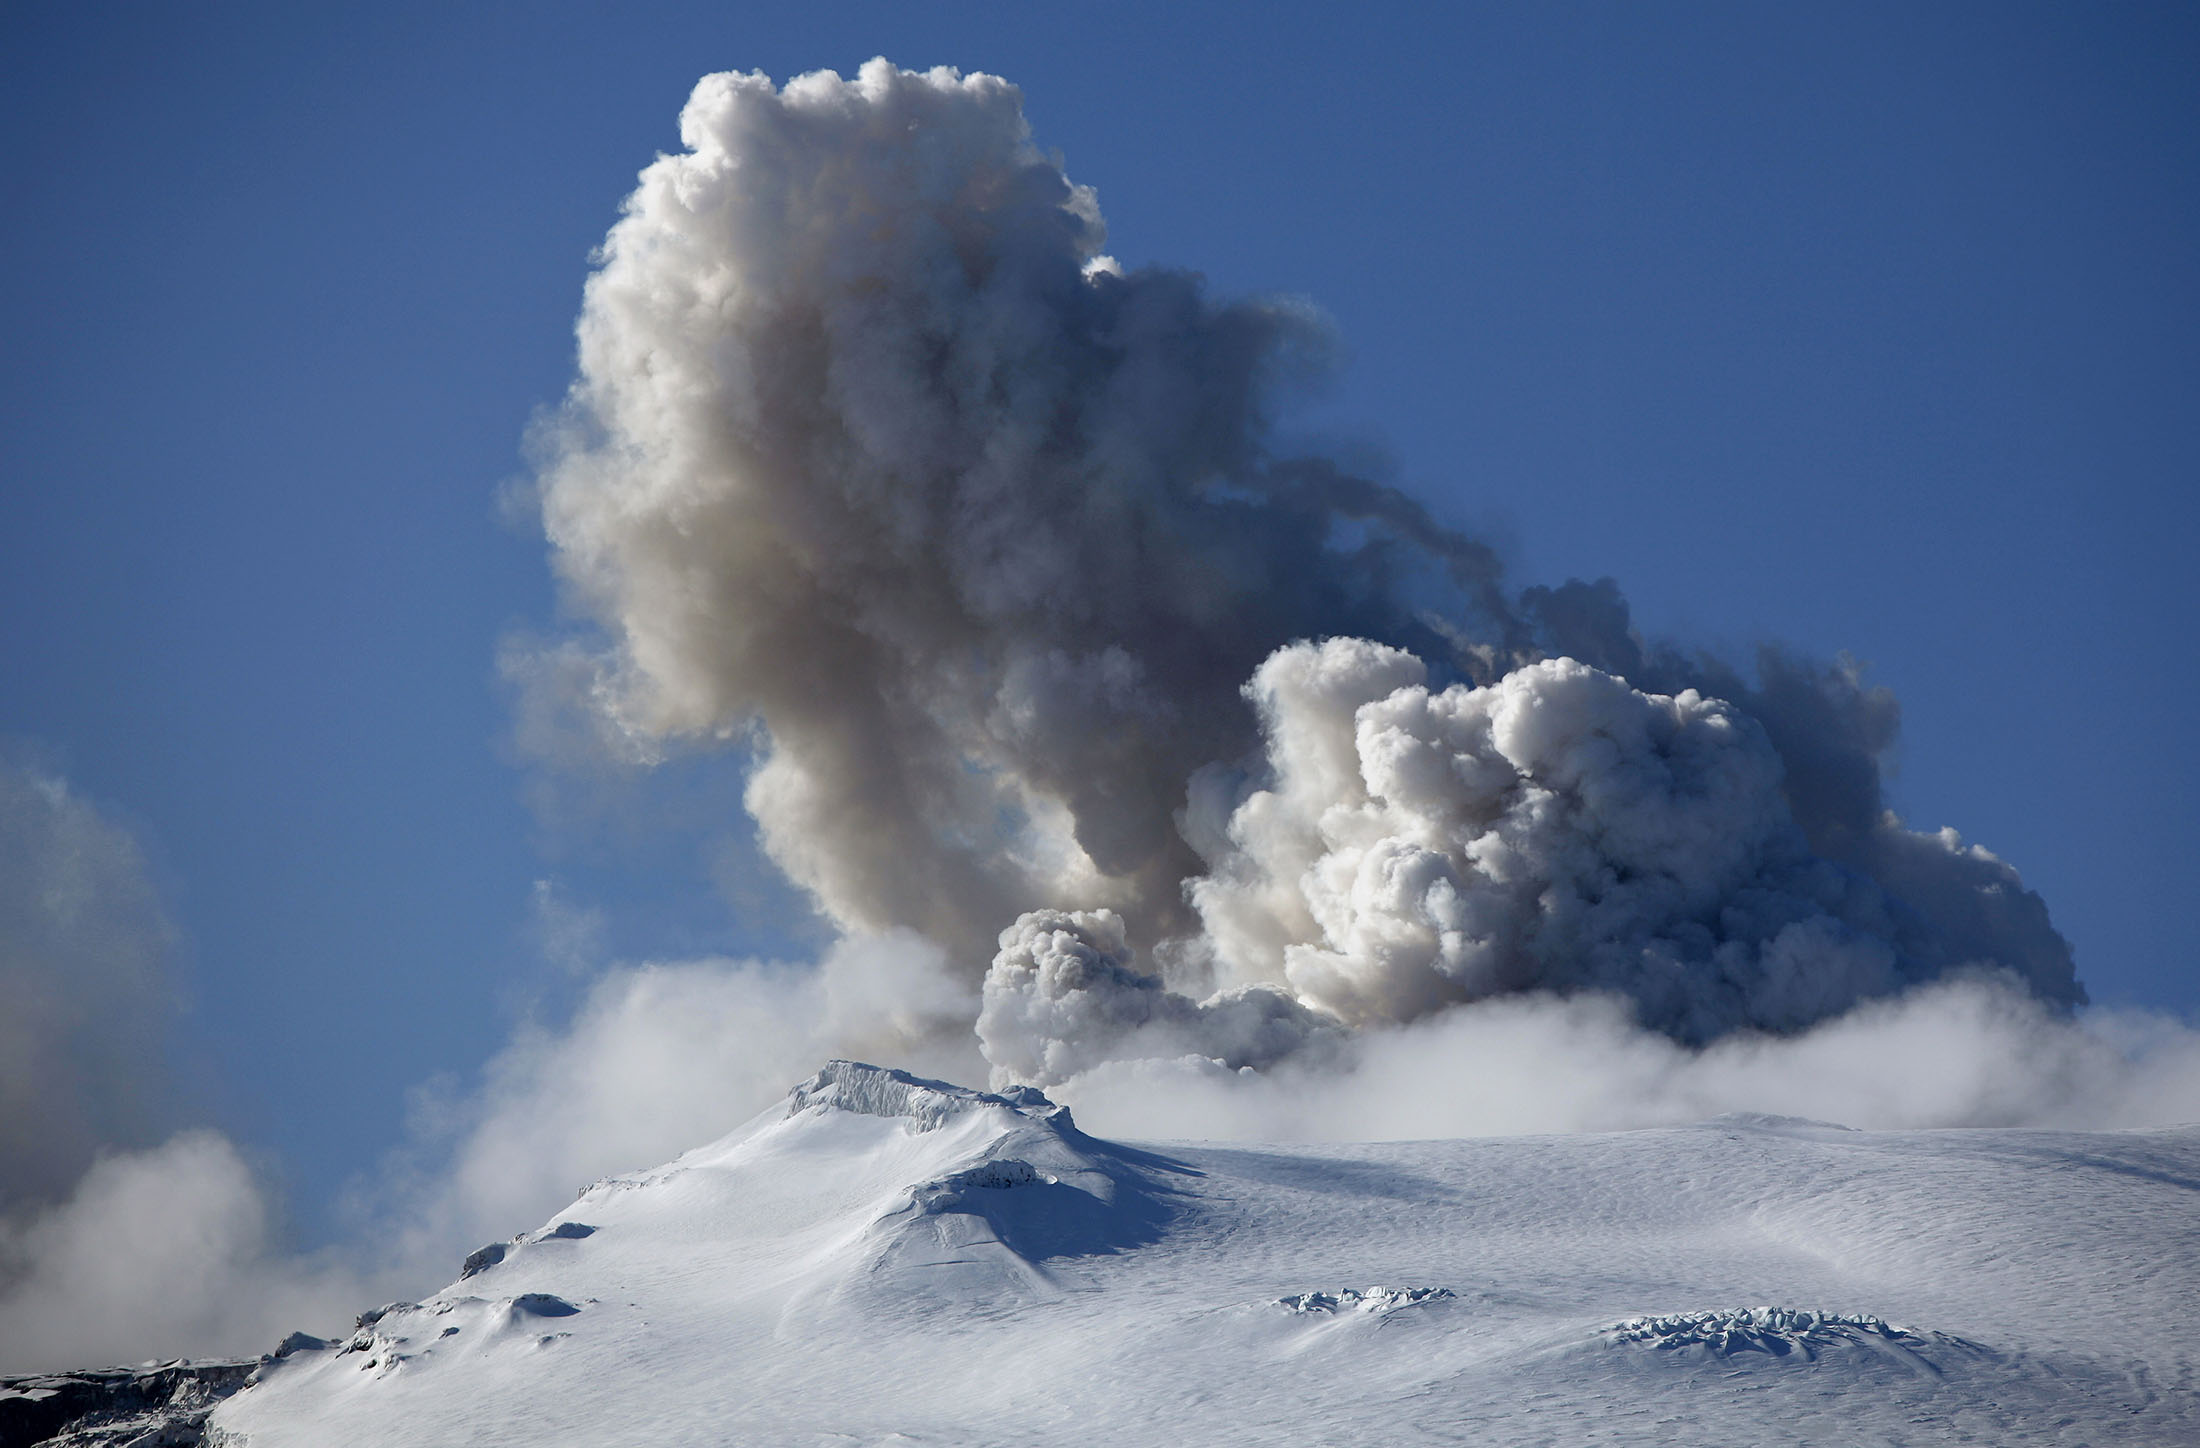 FILE- A plume of ash, dust and steam emits from a volcano erupting beneath Iceland's Eyjafjallajokull glacier, in this file photo dated Wednesday, April 21, 2010, in Eyjafjallajokull, Iceland. A surge of small earthquakes has been reported Tuesday Sept. 6, 2011, around Iceland's Katla volcano, but scientists said Tuesday there is no immediate concern that the increased seismic activity will trigger a dangerous eruption, although history has shown that when the Eyjafjallajokull volcano erupts, Katla isn't far behind.
